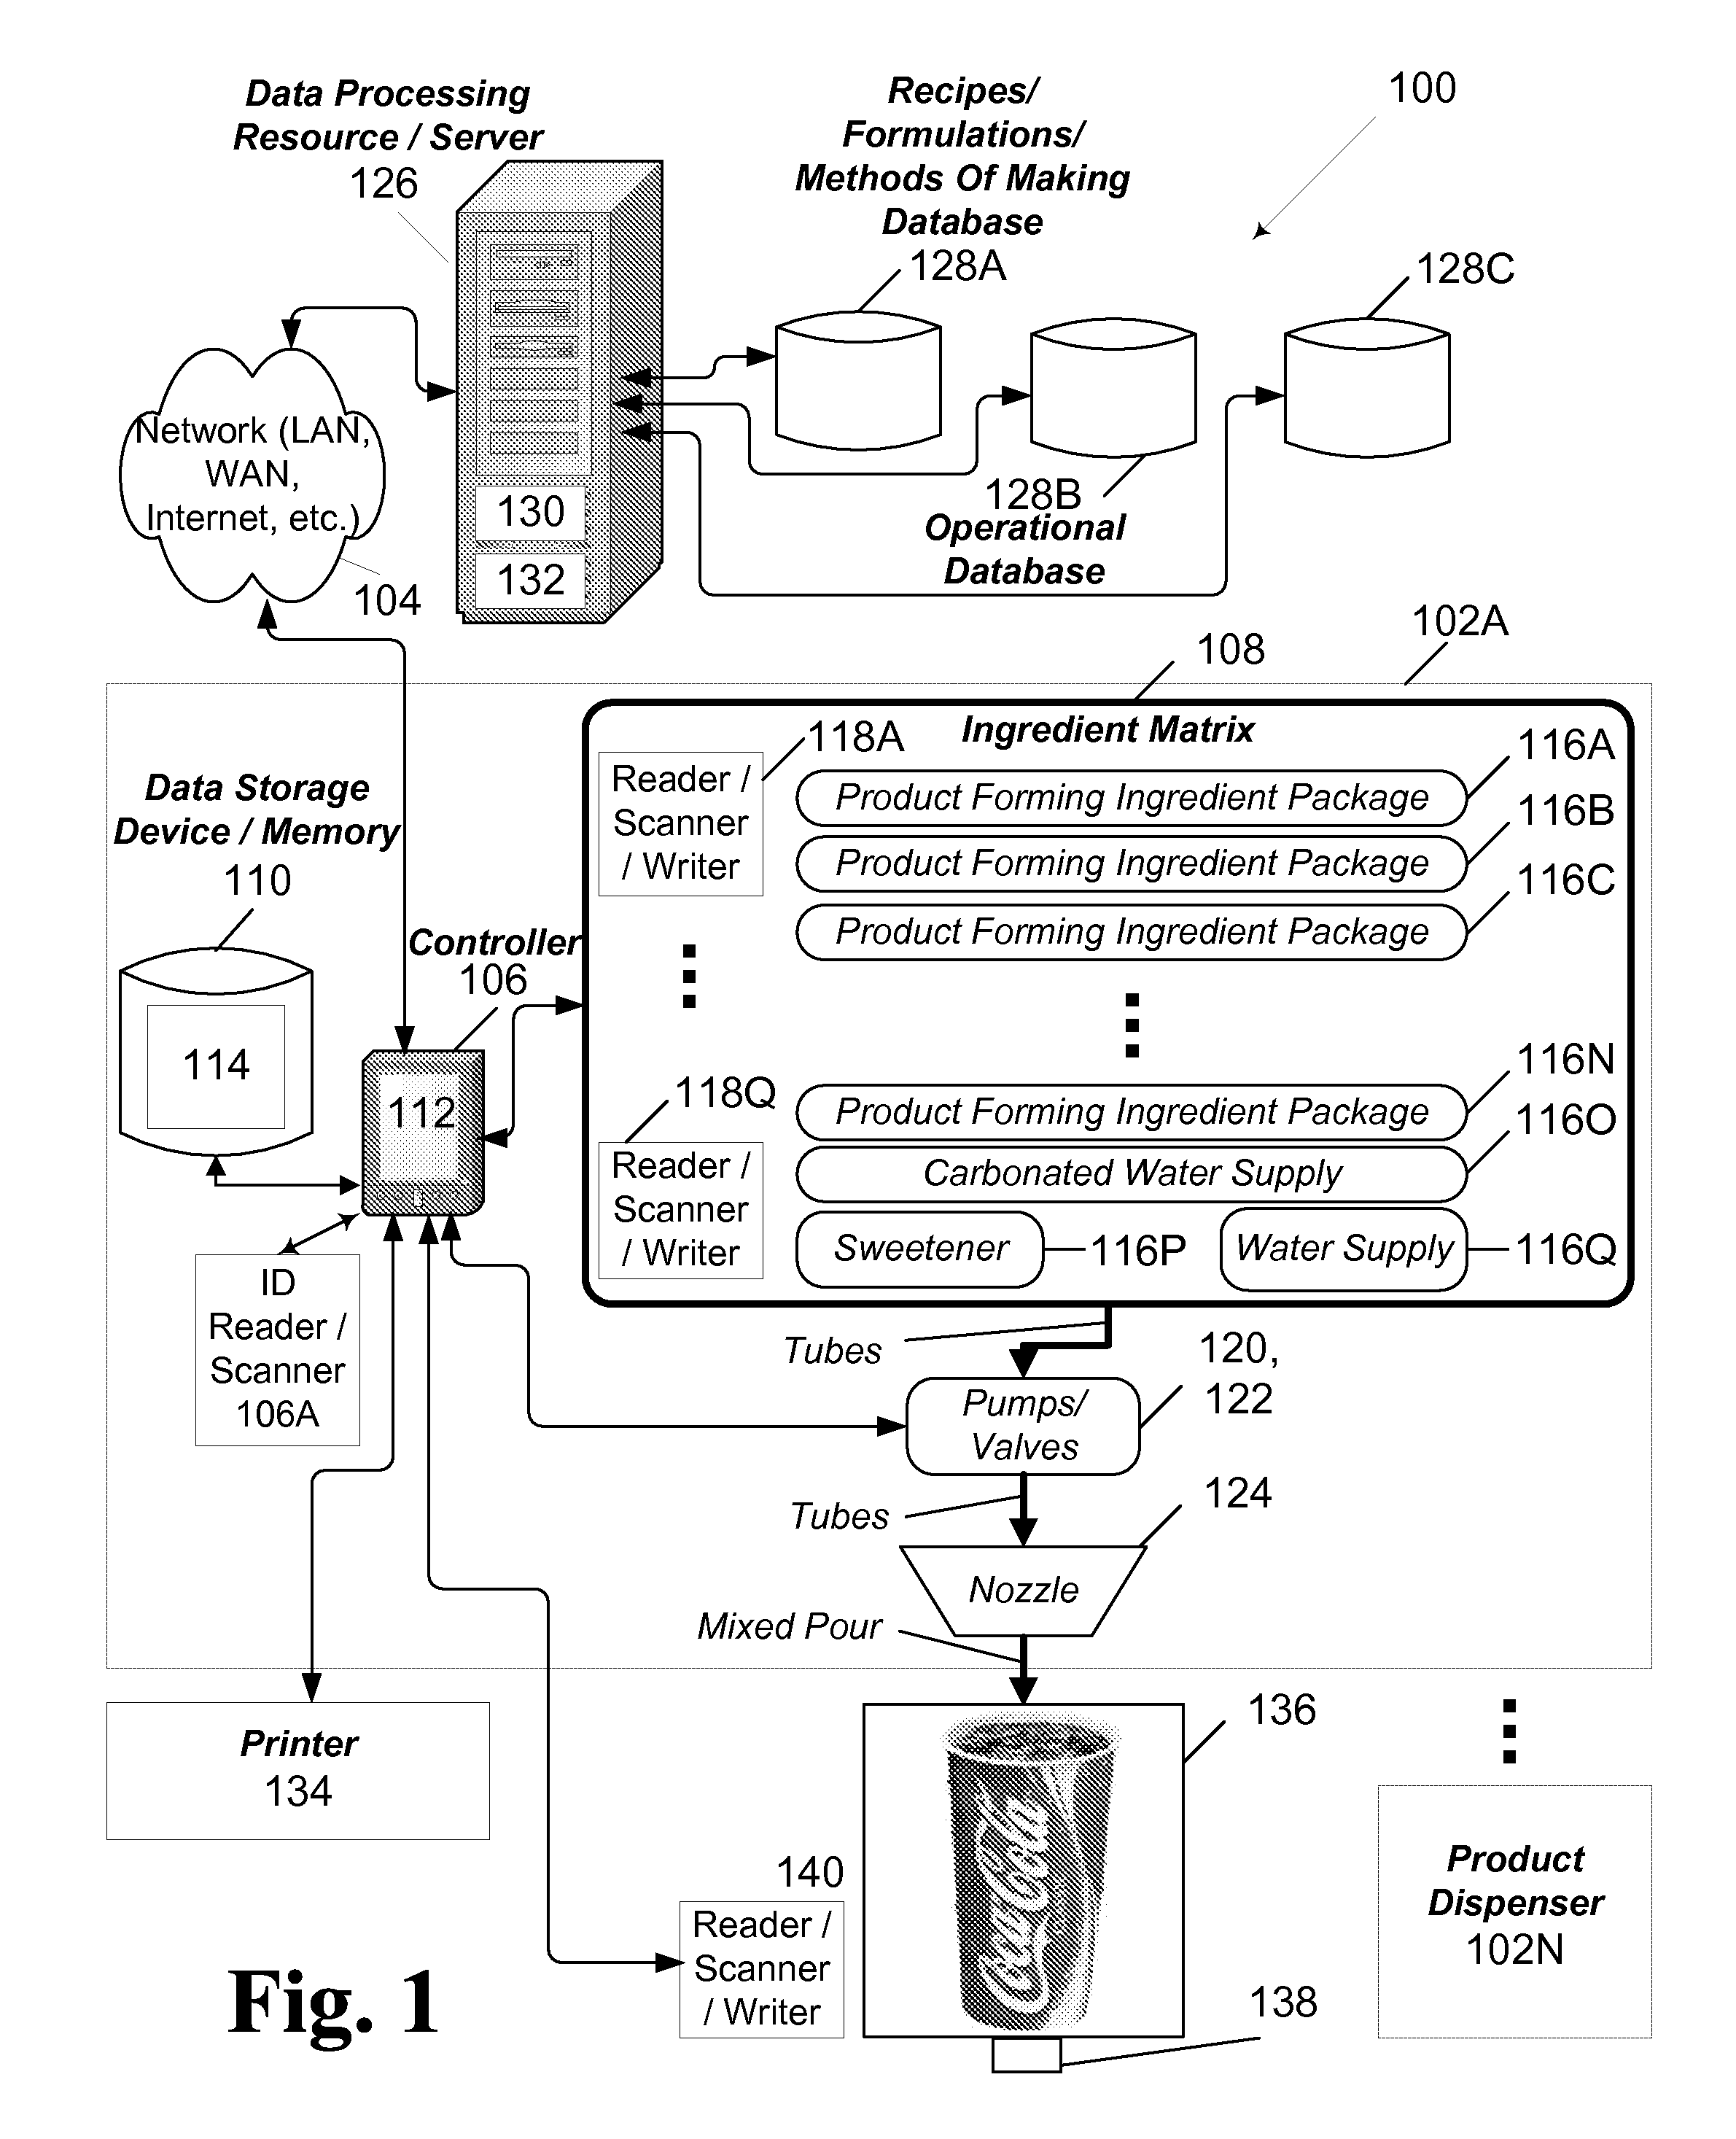 Systems and Methods for Facilitating Consumer-Dispenser Interactions